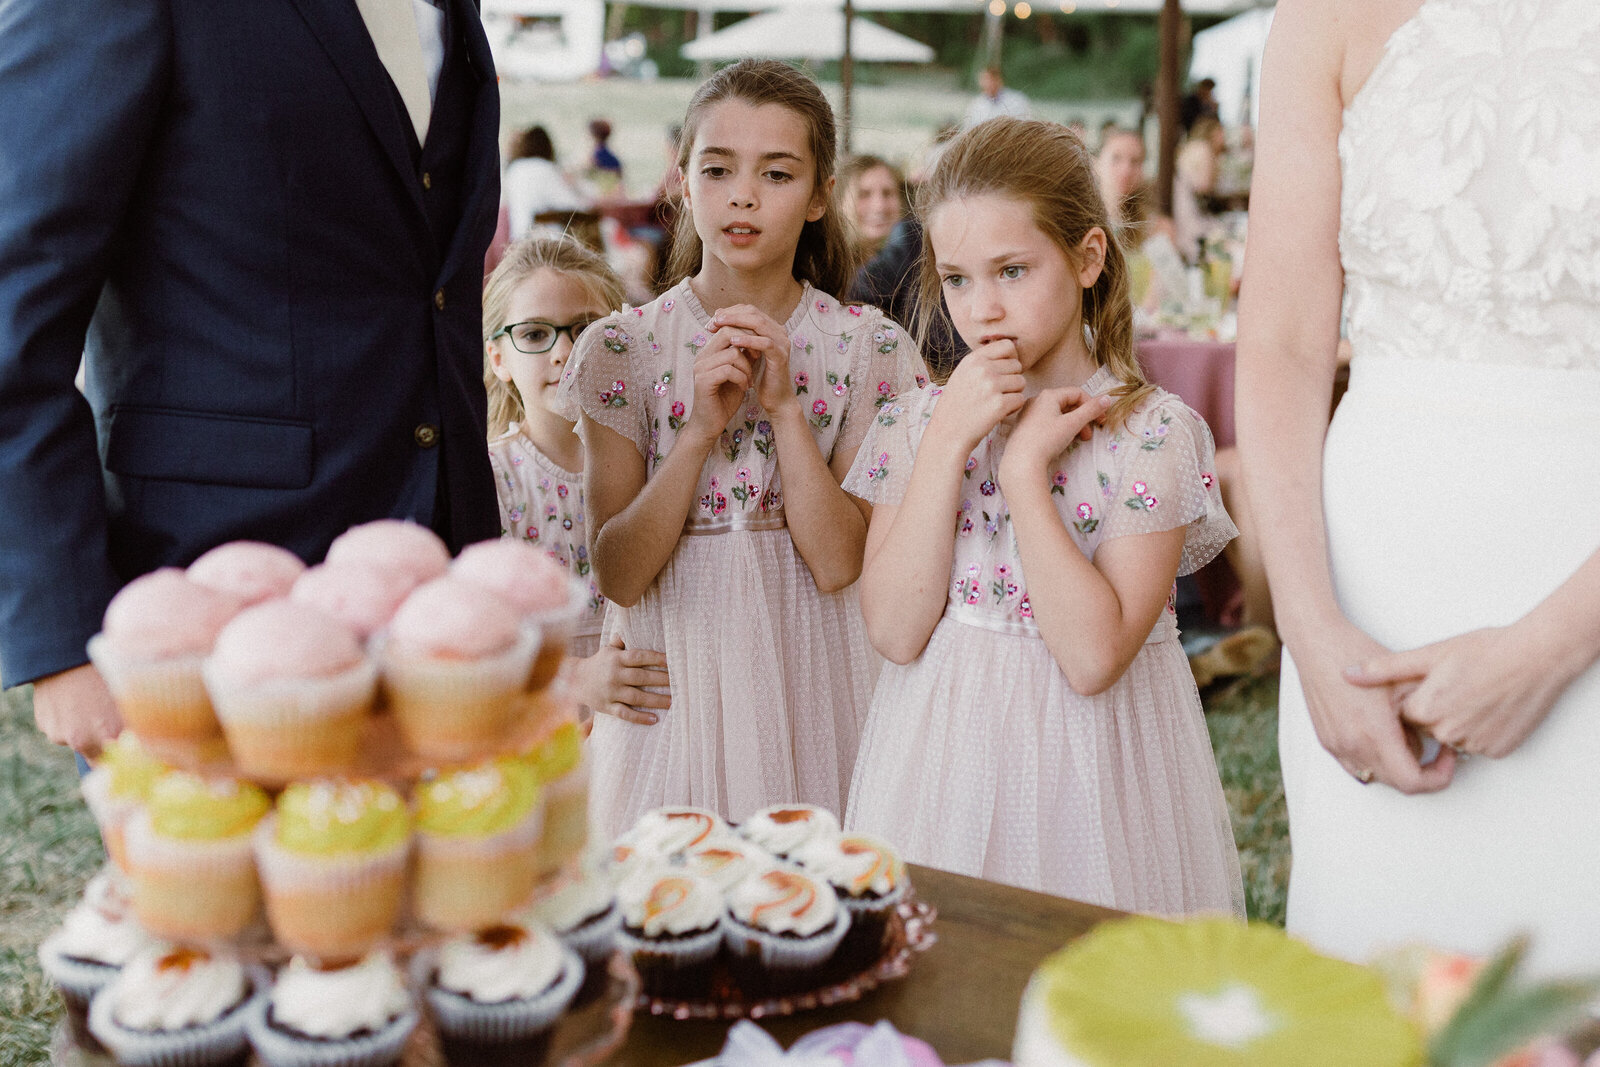 Flower girls at a wedding in Vashon Field and Pond looking at cupcakes